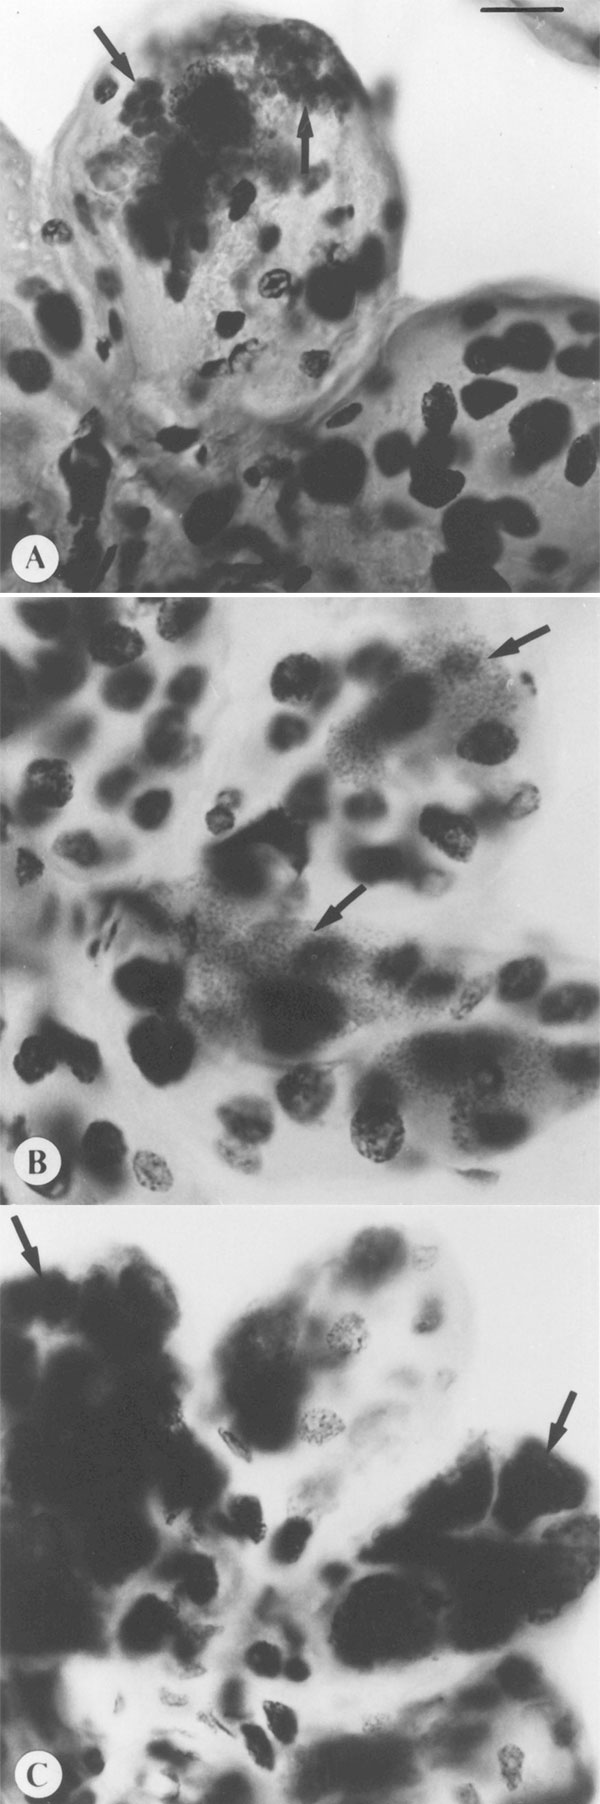 Comparison of morphology and tinctorial properties of Feulgen stained, intact tick salivary glands infected by three of the deer tick pathogen guild. Spirochetes only transiently migrate through salivary tissues, and thus would not be visualized by this technique. (A) Ehrlichia microti. Polyhedral clusters of rickettsiae (arrows) within hypertrophied salivary acinus. (B) Babesia microti, dense stippling of sporoblasts (arrows). Each minute dot represents the nucleus of a sporozoite. (C) Deer tic